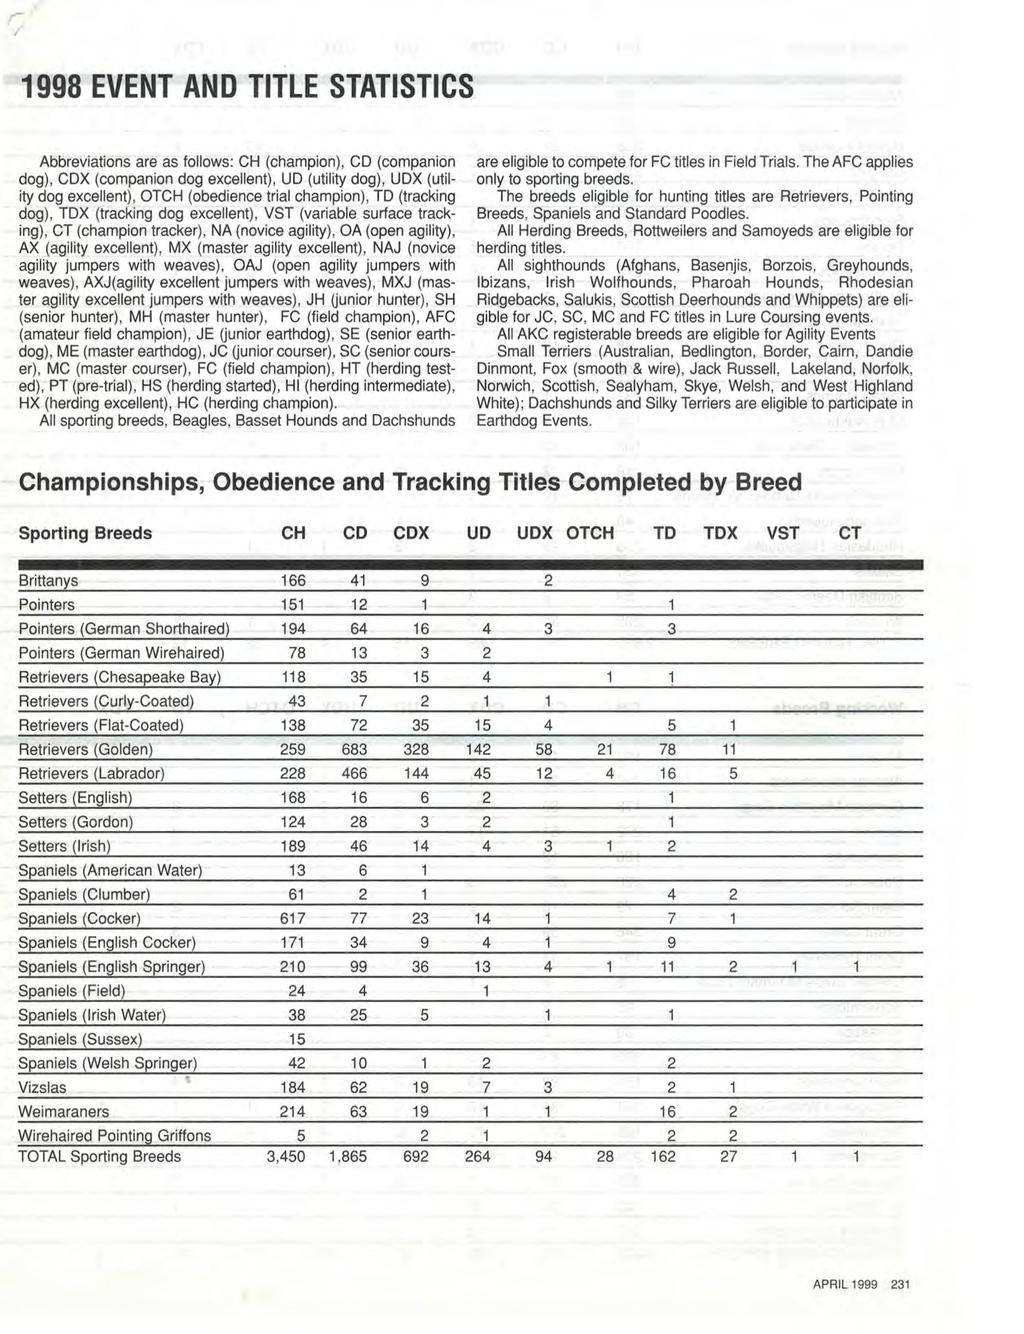 1998 EVENT AND TITLE STATISTICS Abbreviations are as follows: CH (champion), CD (companion dog), CDX (companion dog excellent), UD (utility dog), UDX (utility dog excellent), OTCH (obedience trial